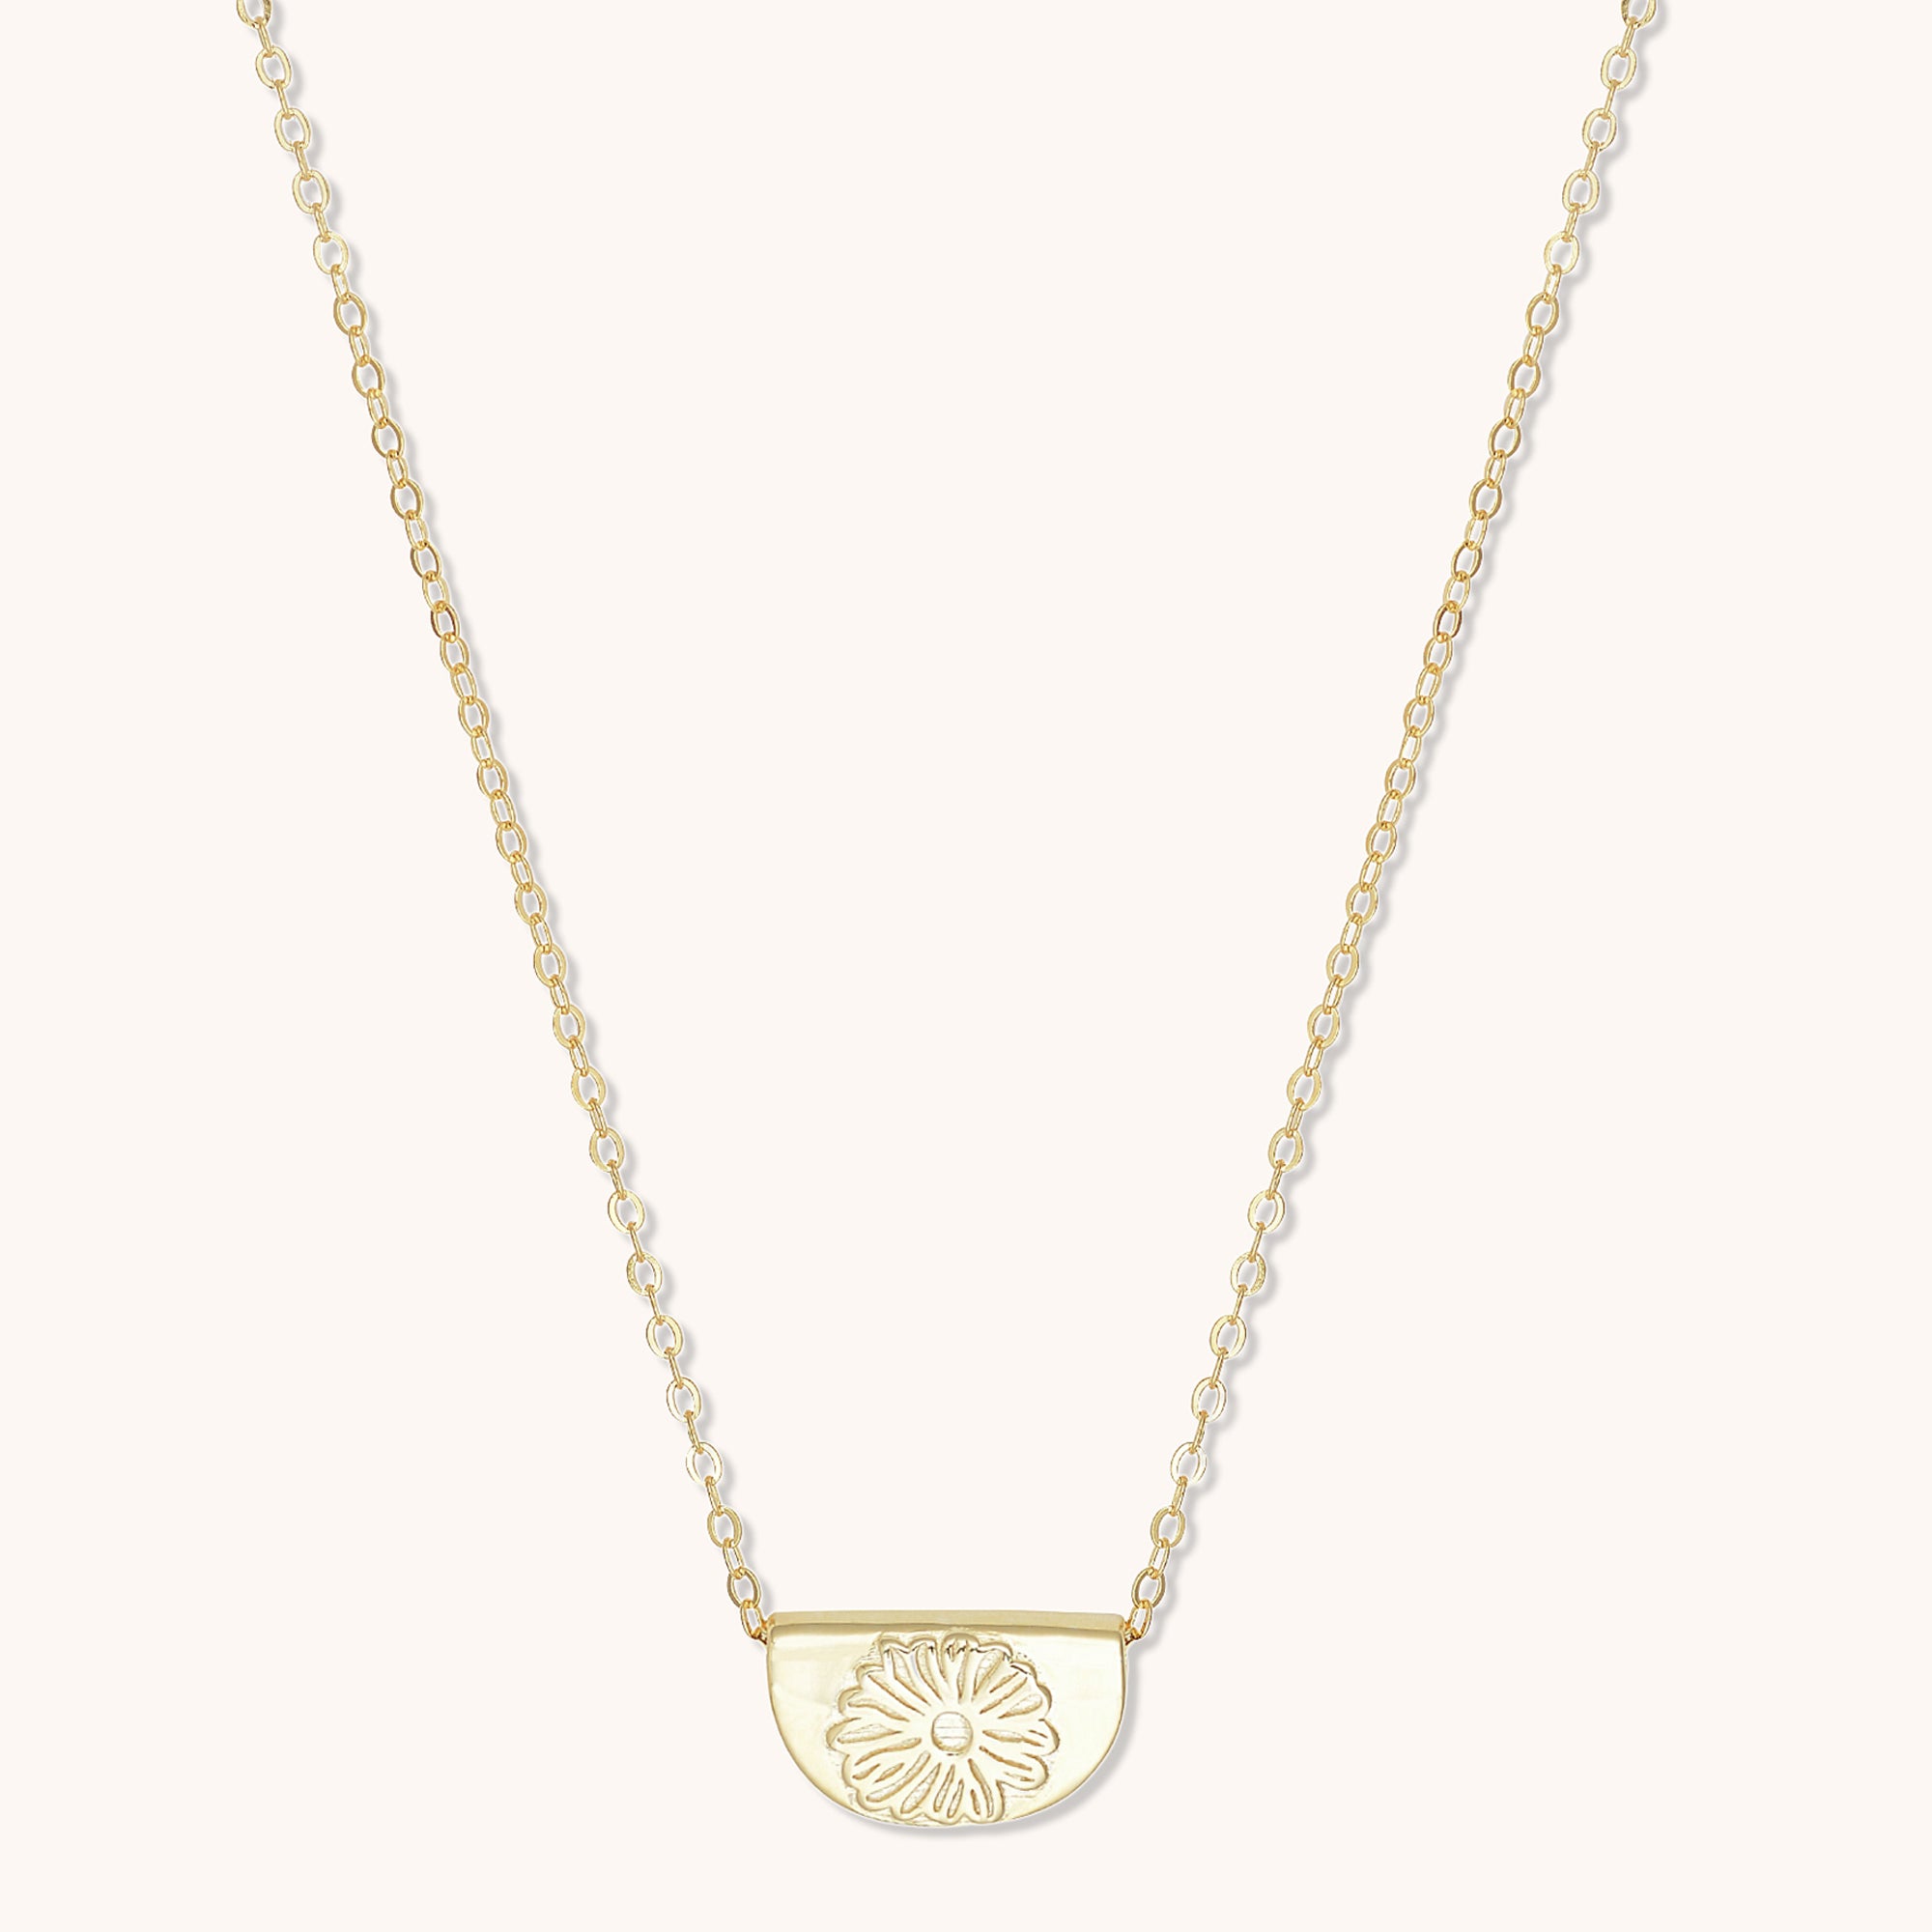 Birth Flower Necklace April (Daisy) Gold